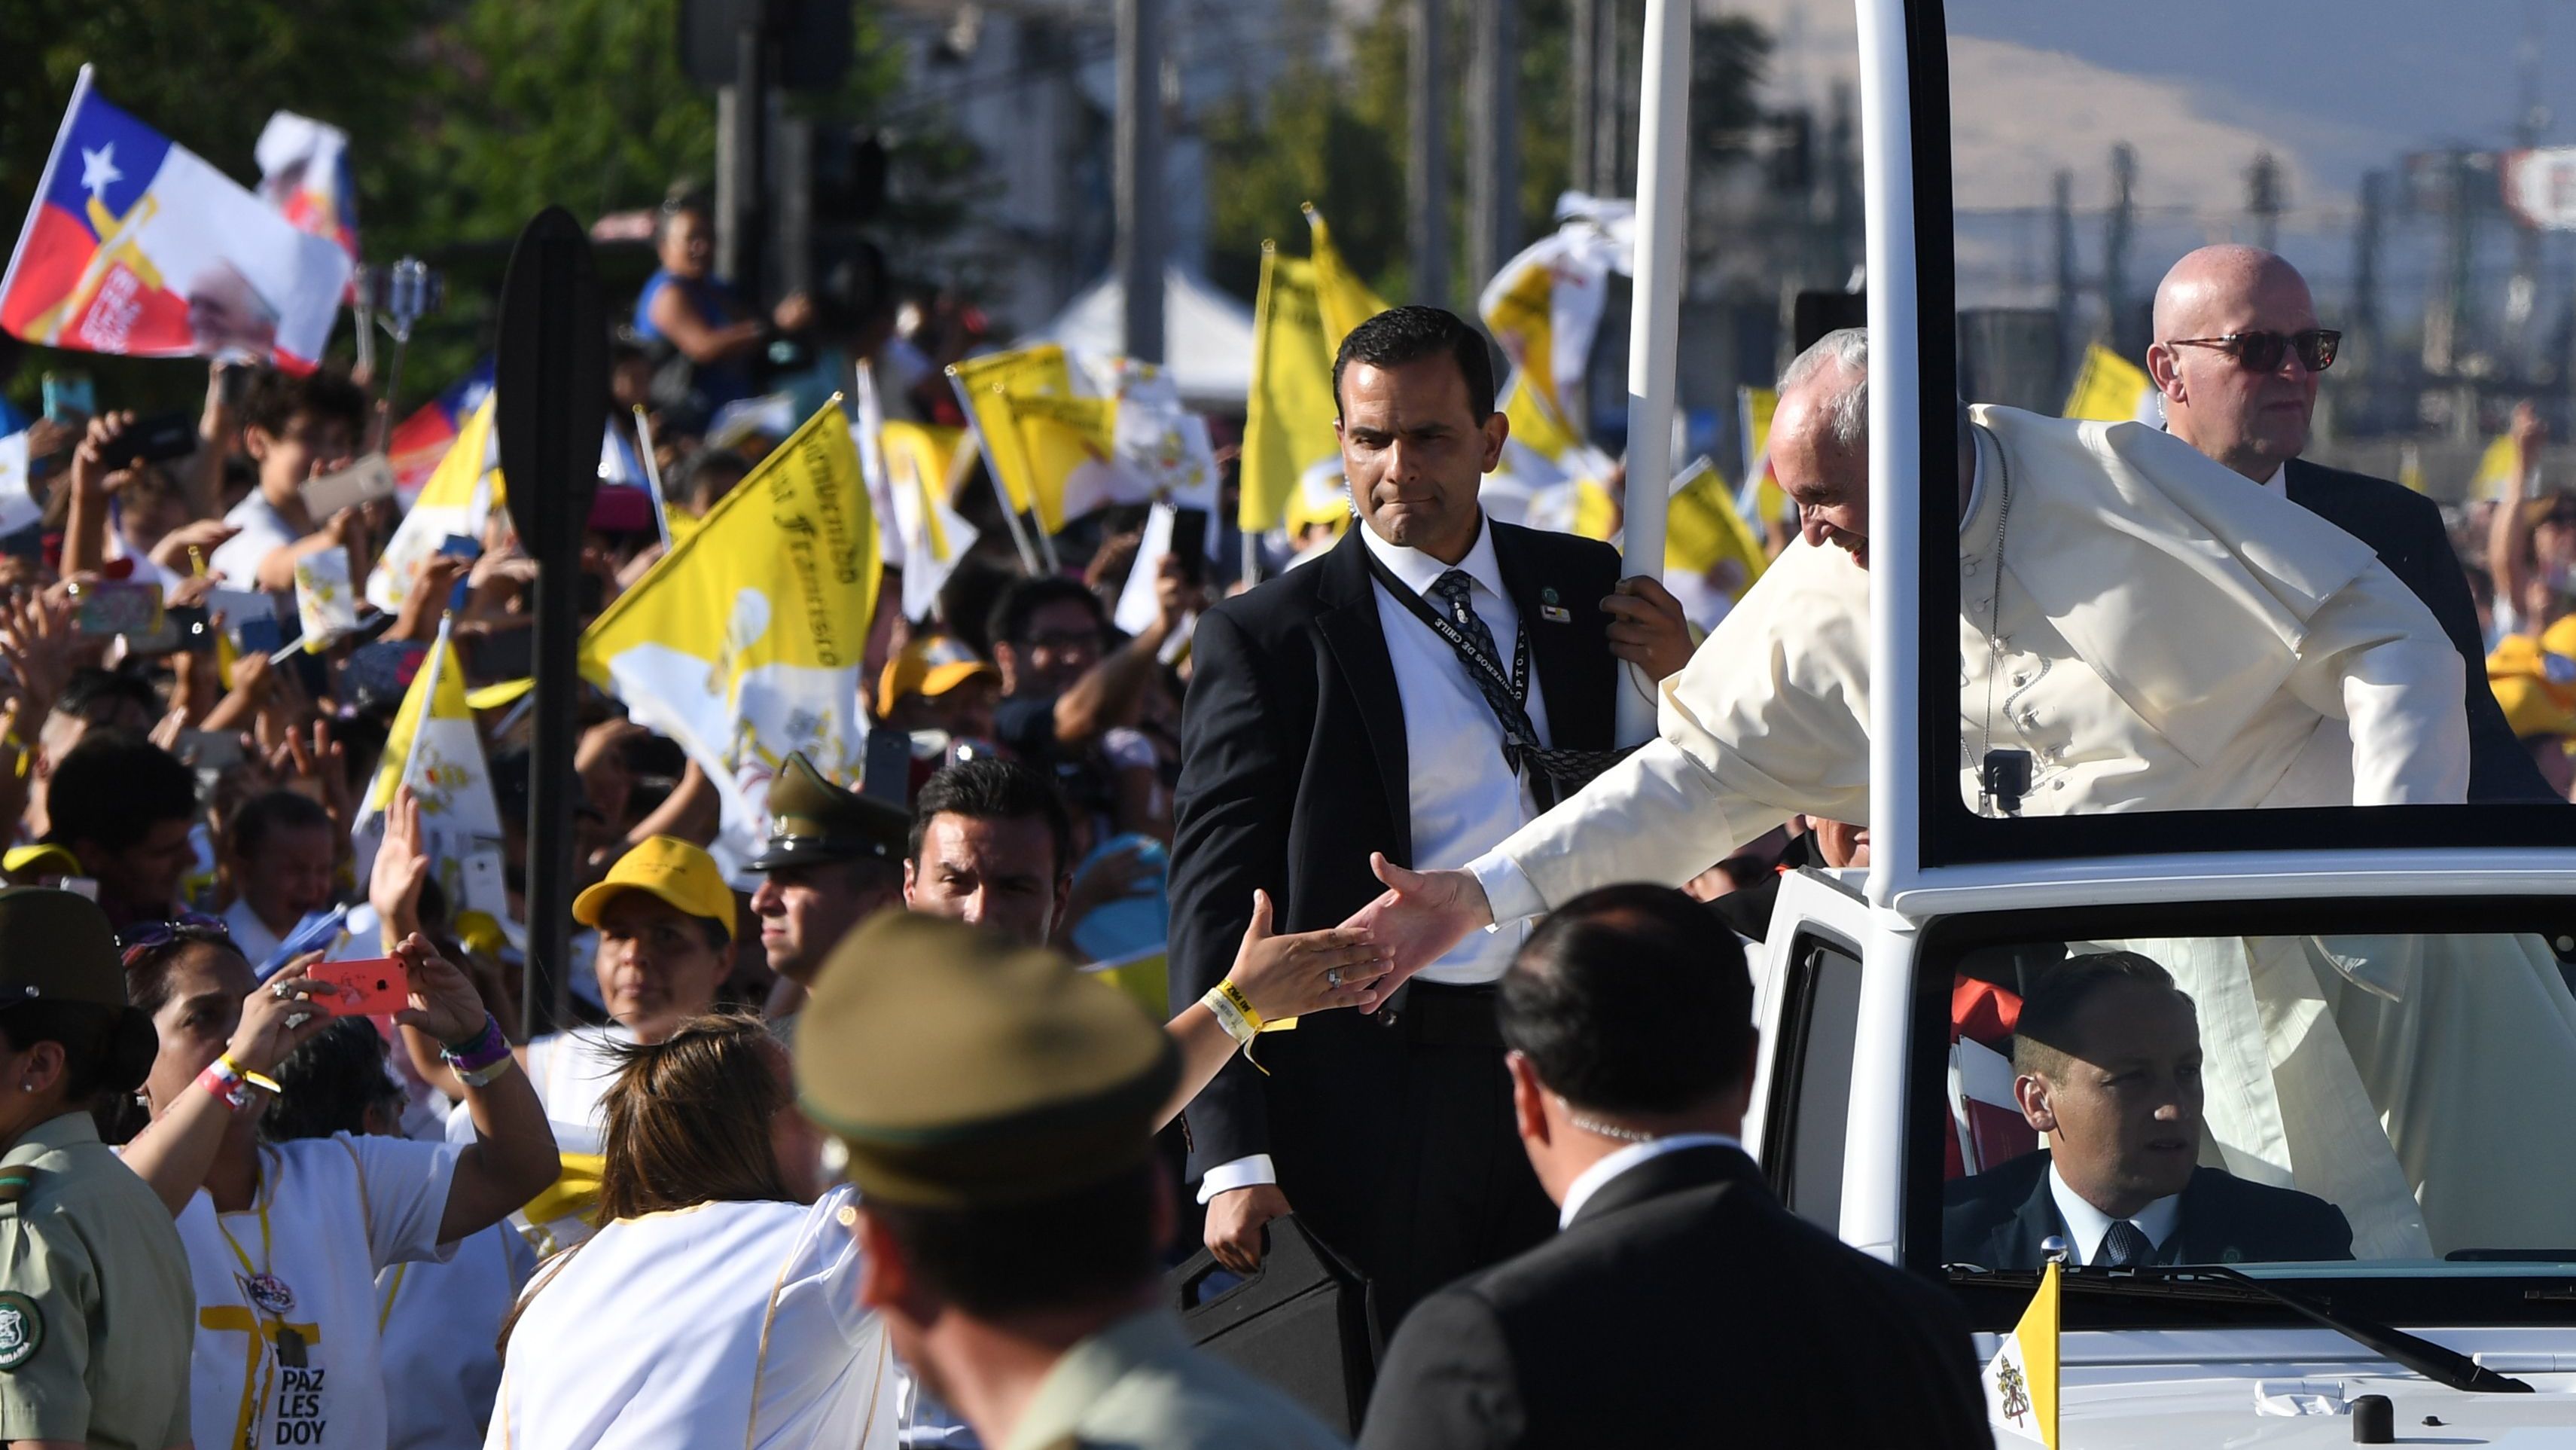 Pope Francis waves from the popemobile in Santiago, Chile on January 16, 2018.